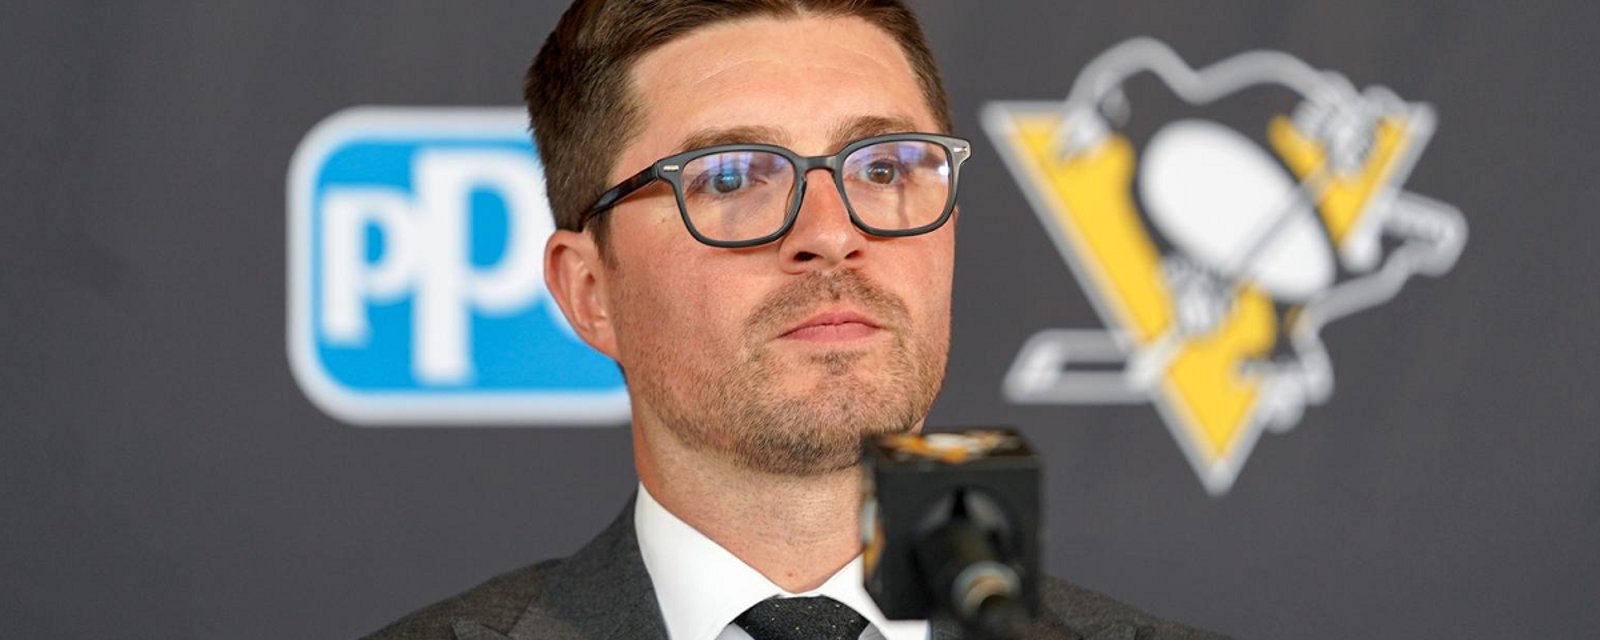 Kyle Dubas on a potential coaching change in Pittsburgh.